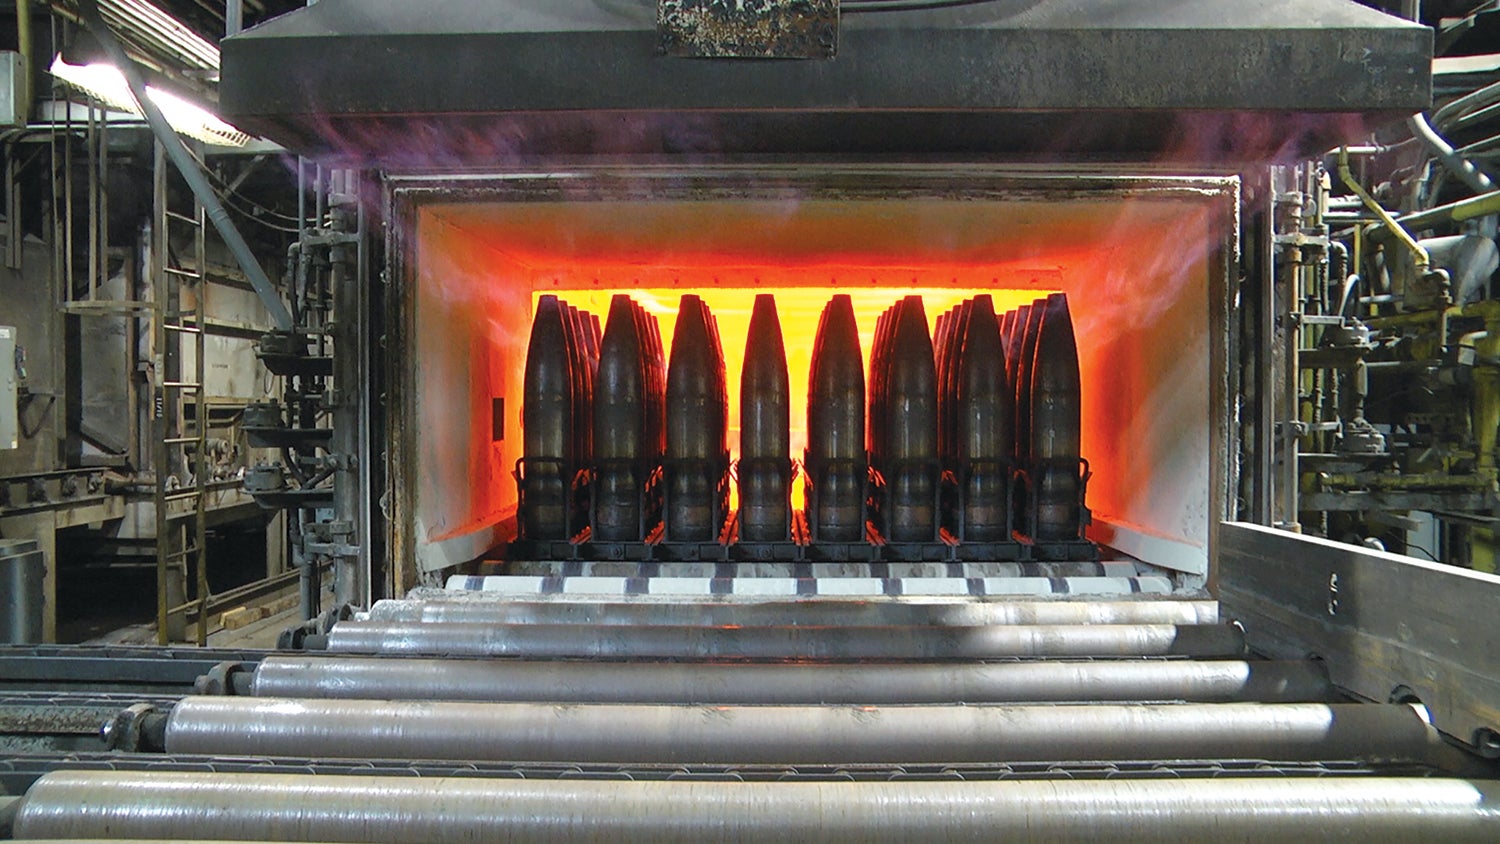 Cartridge cases are heated during production at Scranton Army Ammunition Plant, Pennsylvania. (Credit: U.S. Army/Dori Whipple)